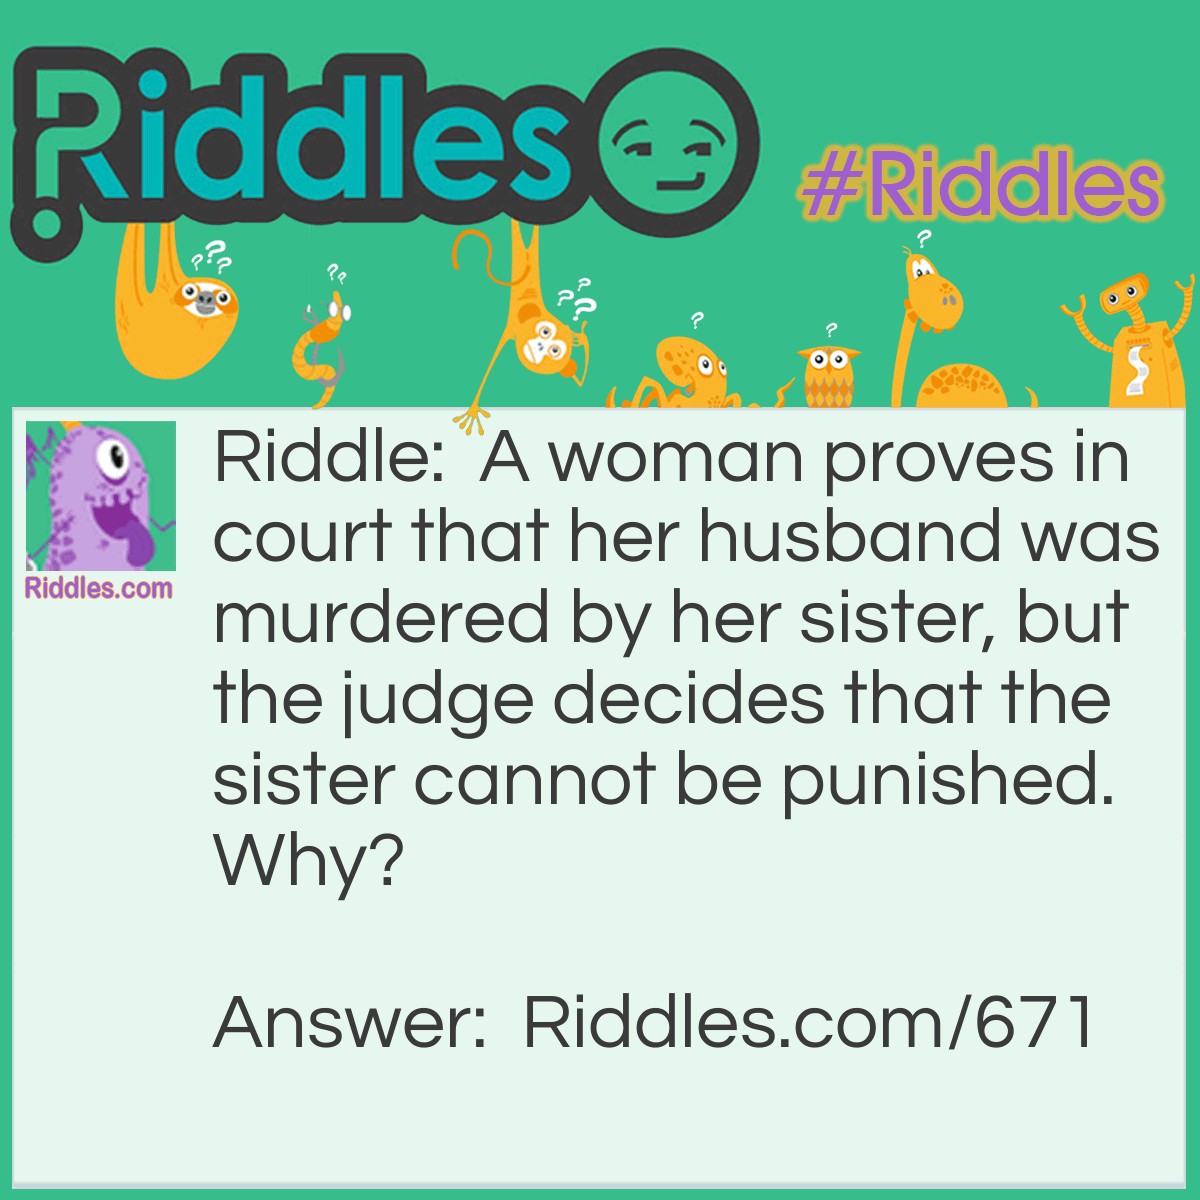 Riddle: A woman proves in court that her husband was murdered by her sister, but the judge decides that the sister cannot be punished. Why? Answer: The sisters are Siamese twins.